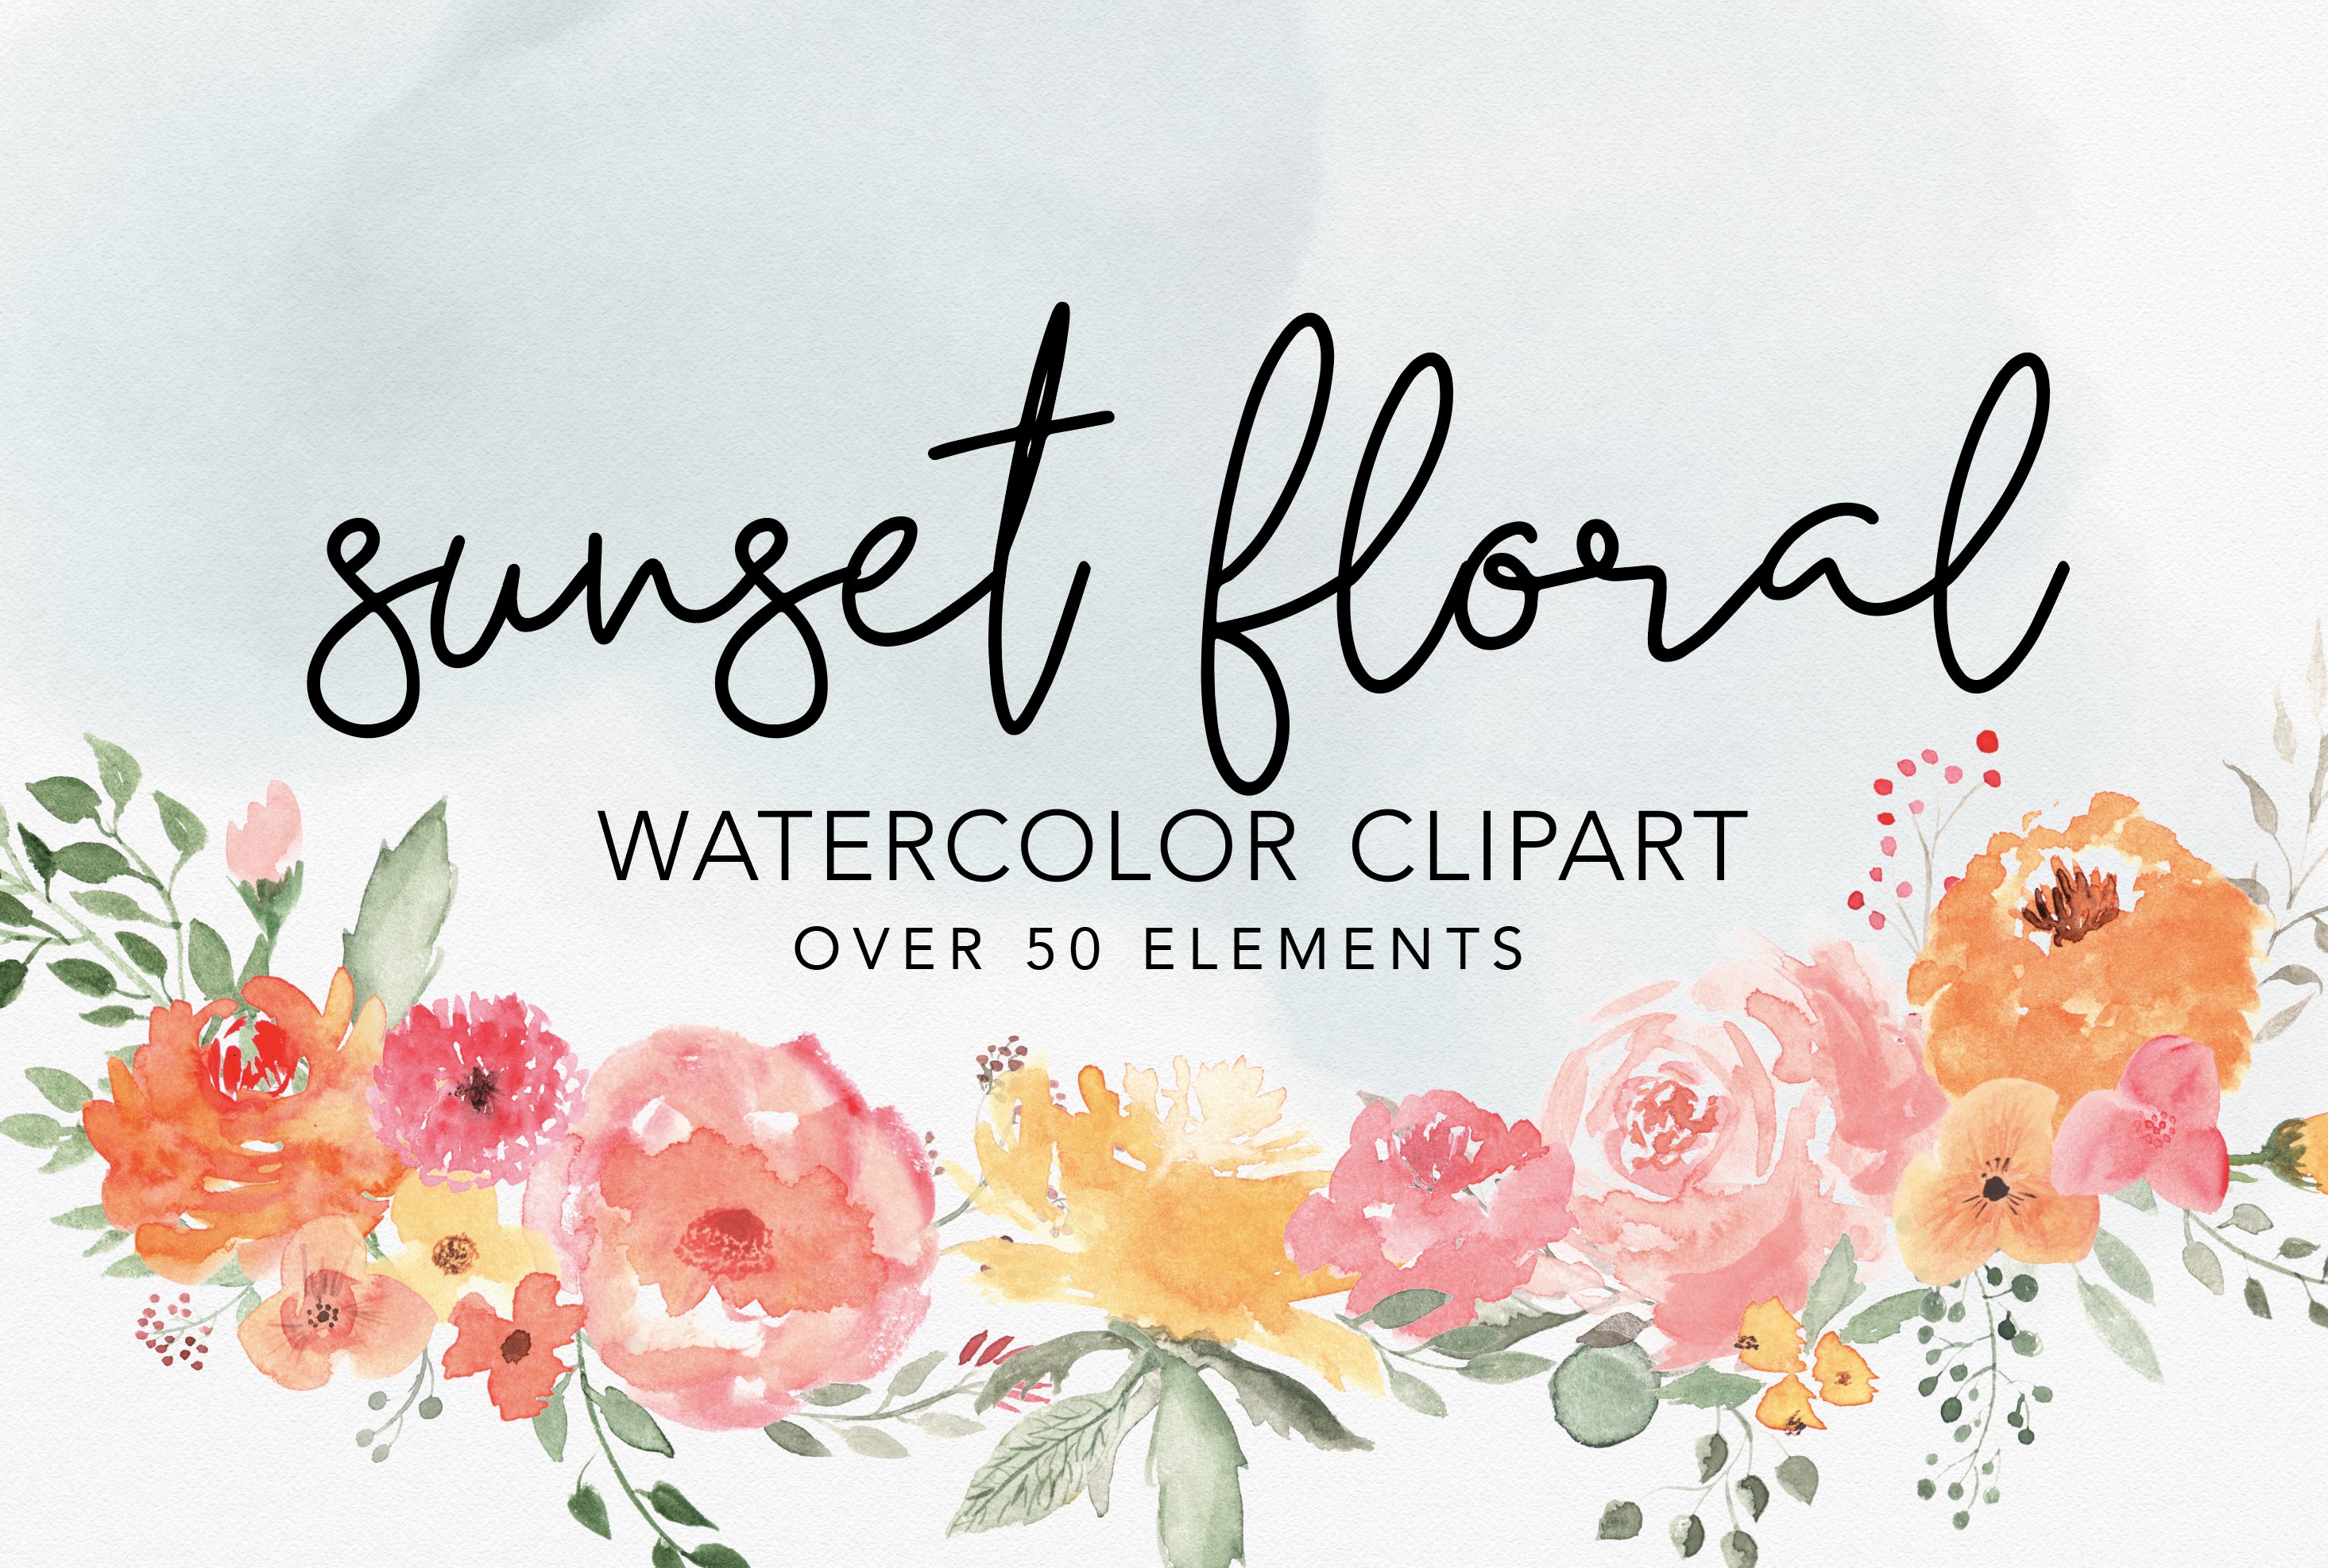 Sunset Florals Watercolor Set cover image.